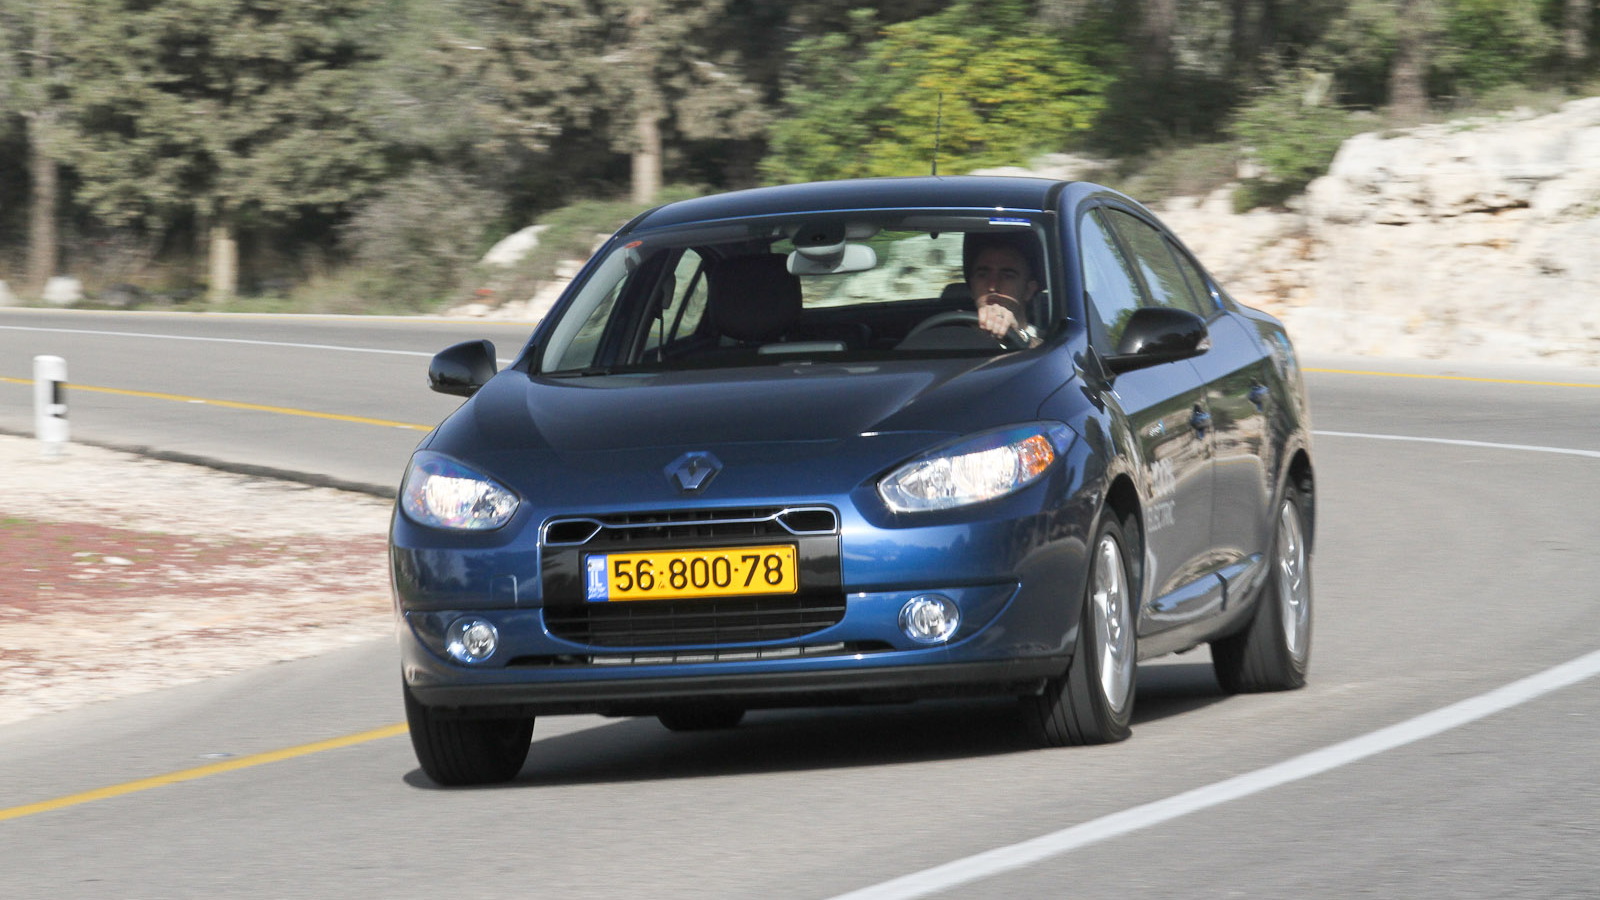 Renault Fluence ZE electric cars in Israel, provided by Better Place [photo: Better Place]